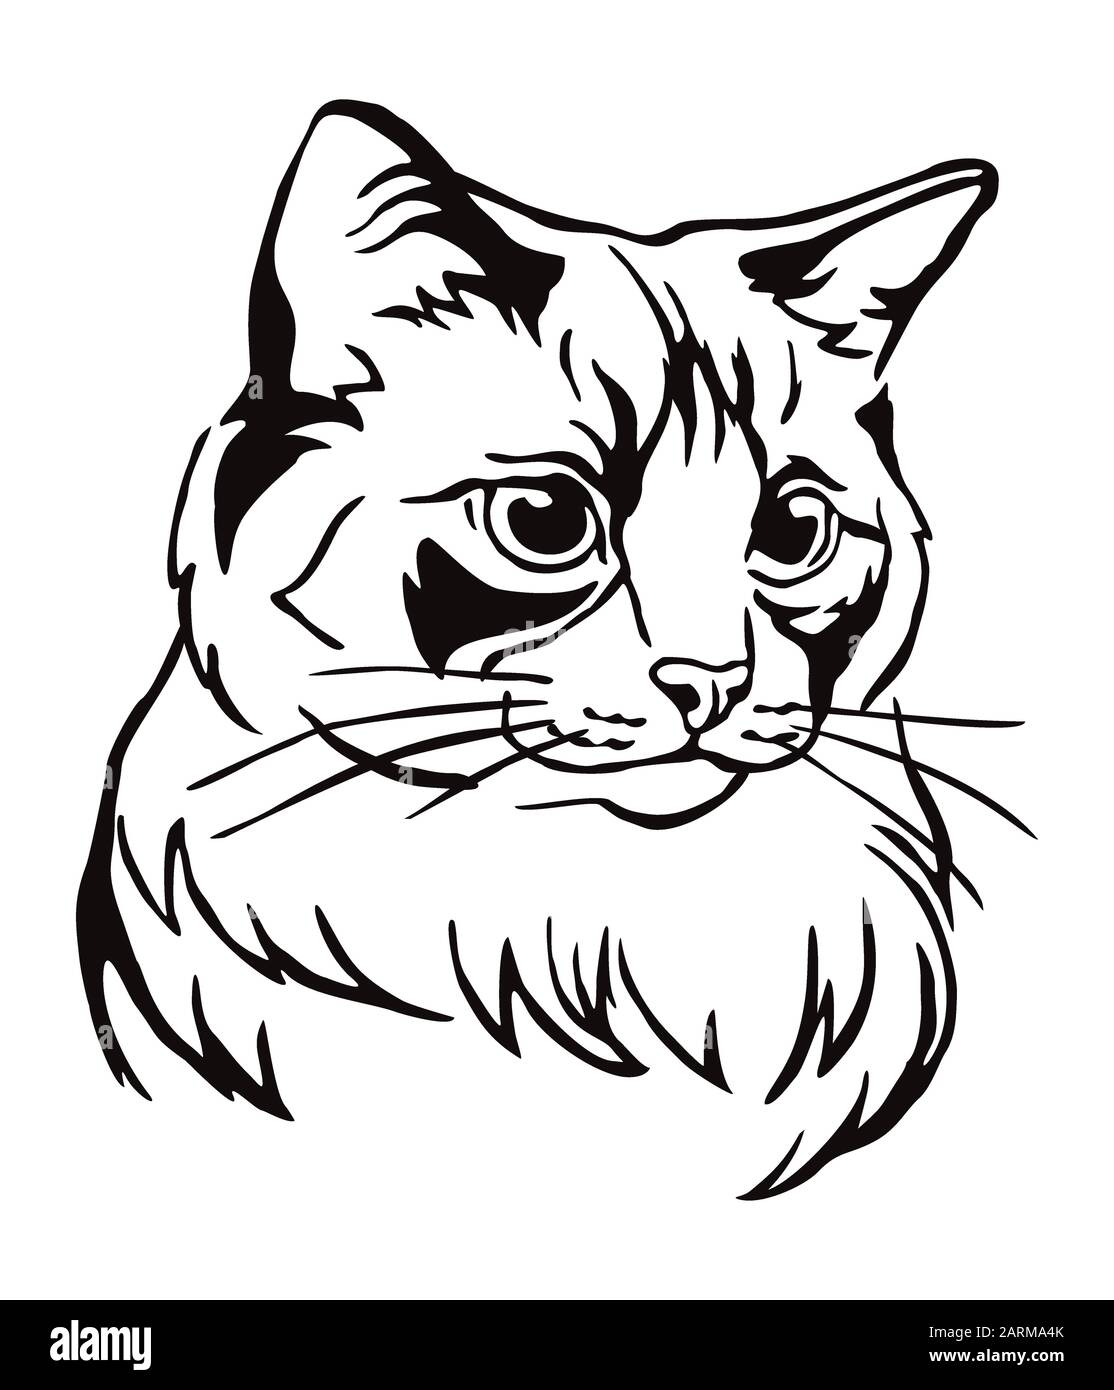 Decorative Portrait Of Ragdoll Cat Contour Vector Illustration In Black Color Isolated On White Background Image For Design Cards And Tattoo Stock Vector Image Art Alamy